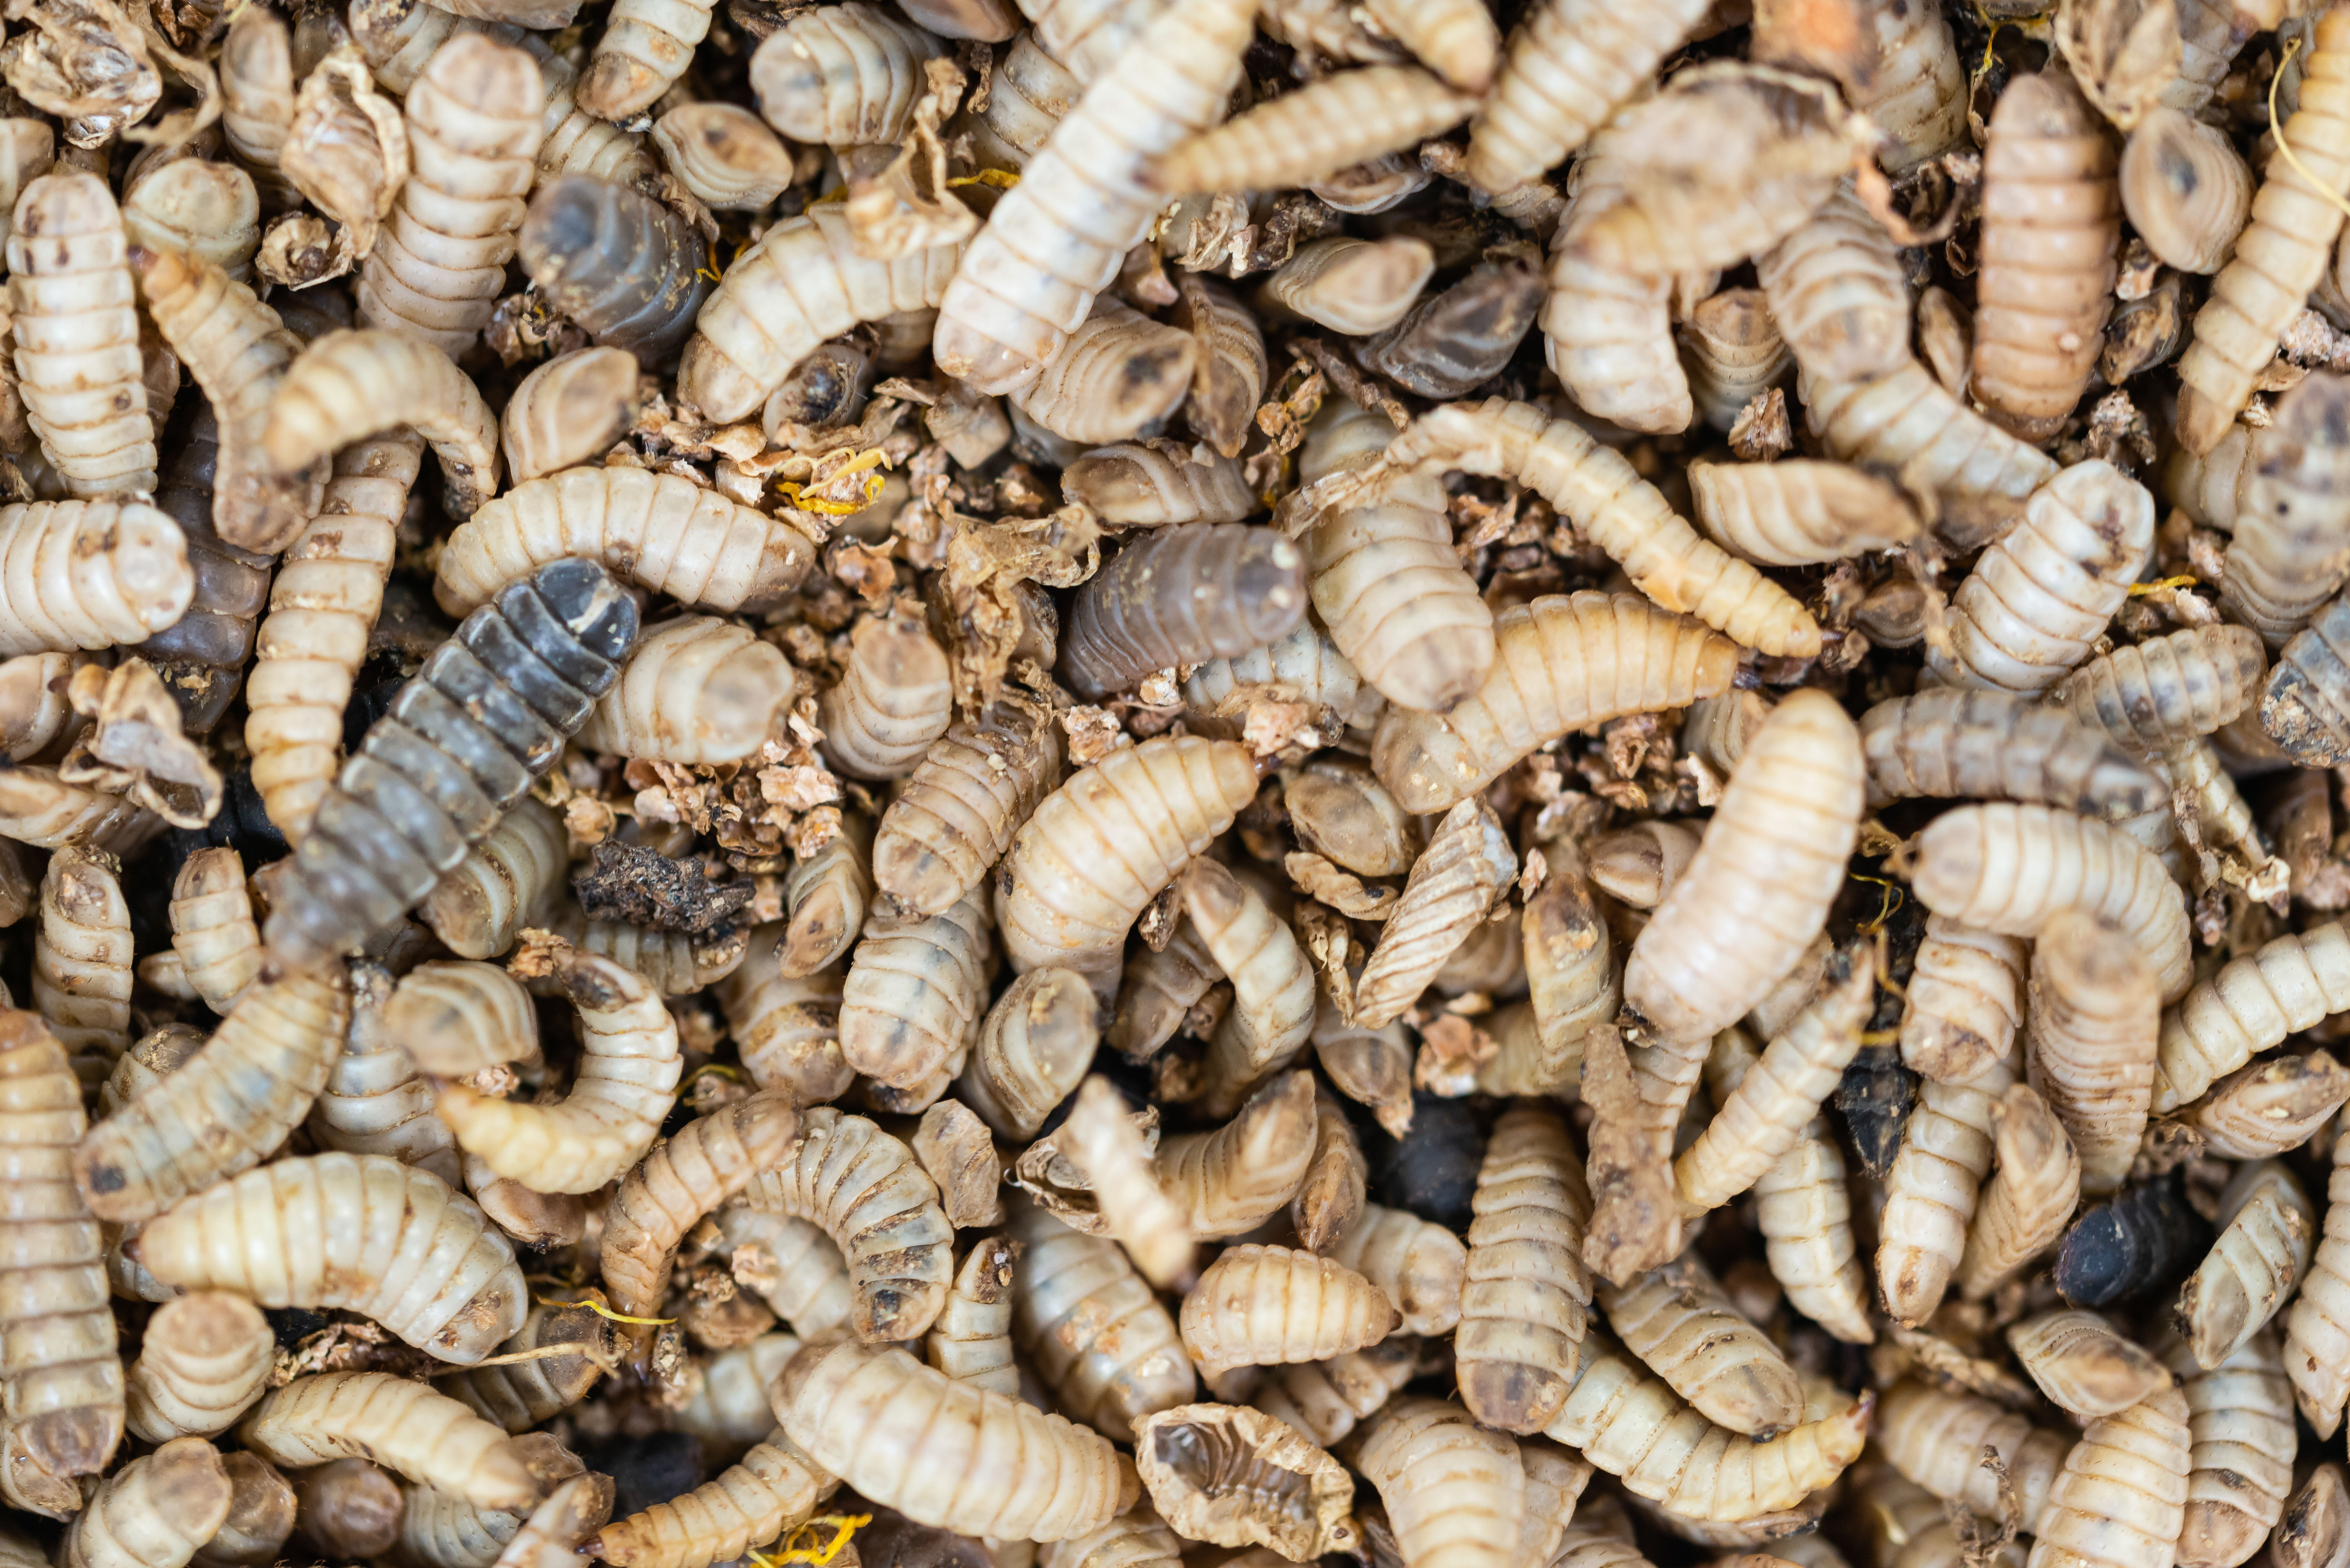 In 10 days the larvae munch their way through 70 percent of the waste, leaving behind a manure laden with nitrogen and calcium, which becomes organic fertiliser